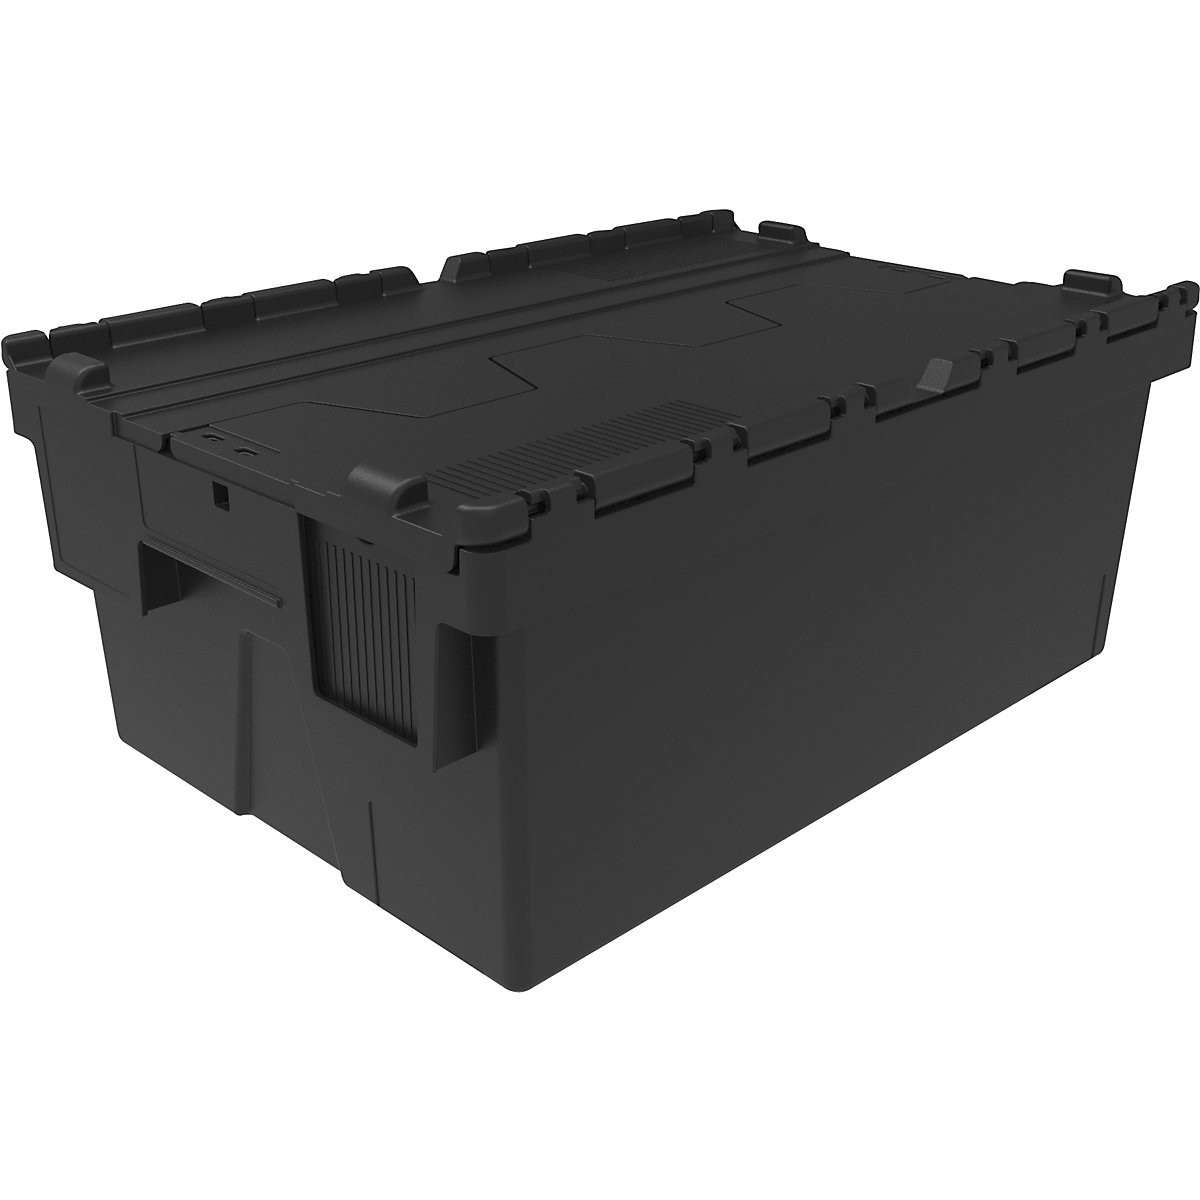 Reusable stacking container, LxWxH 600 x 400 x 250 mm, black-3